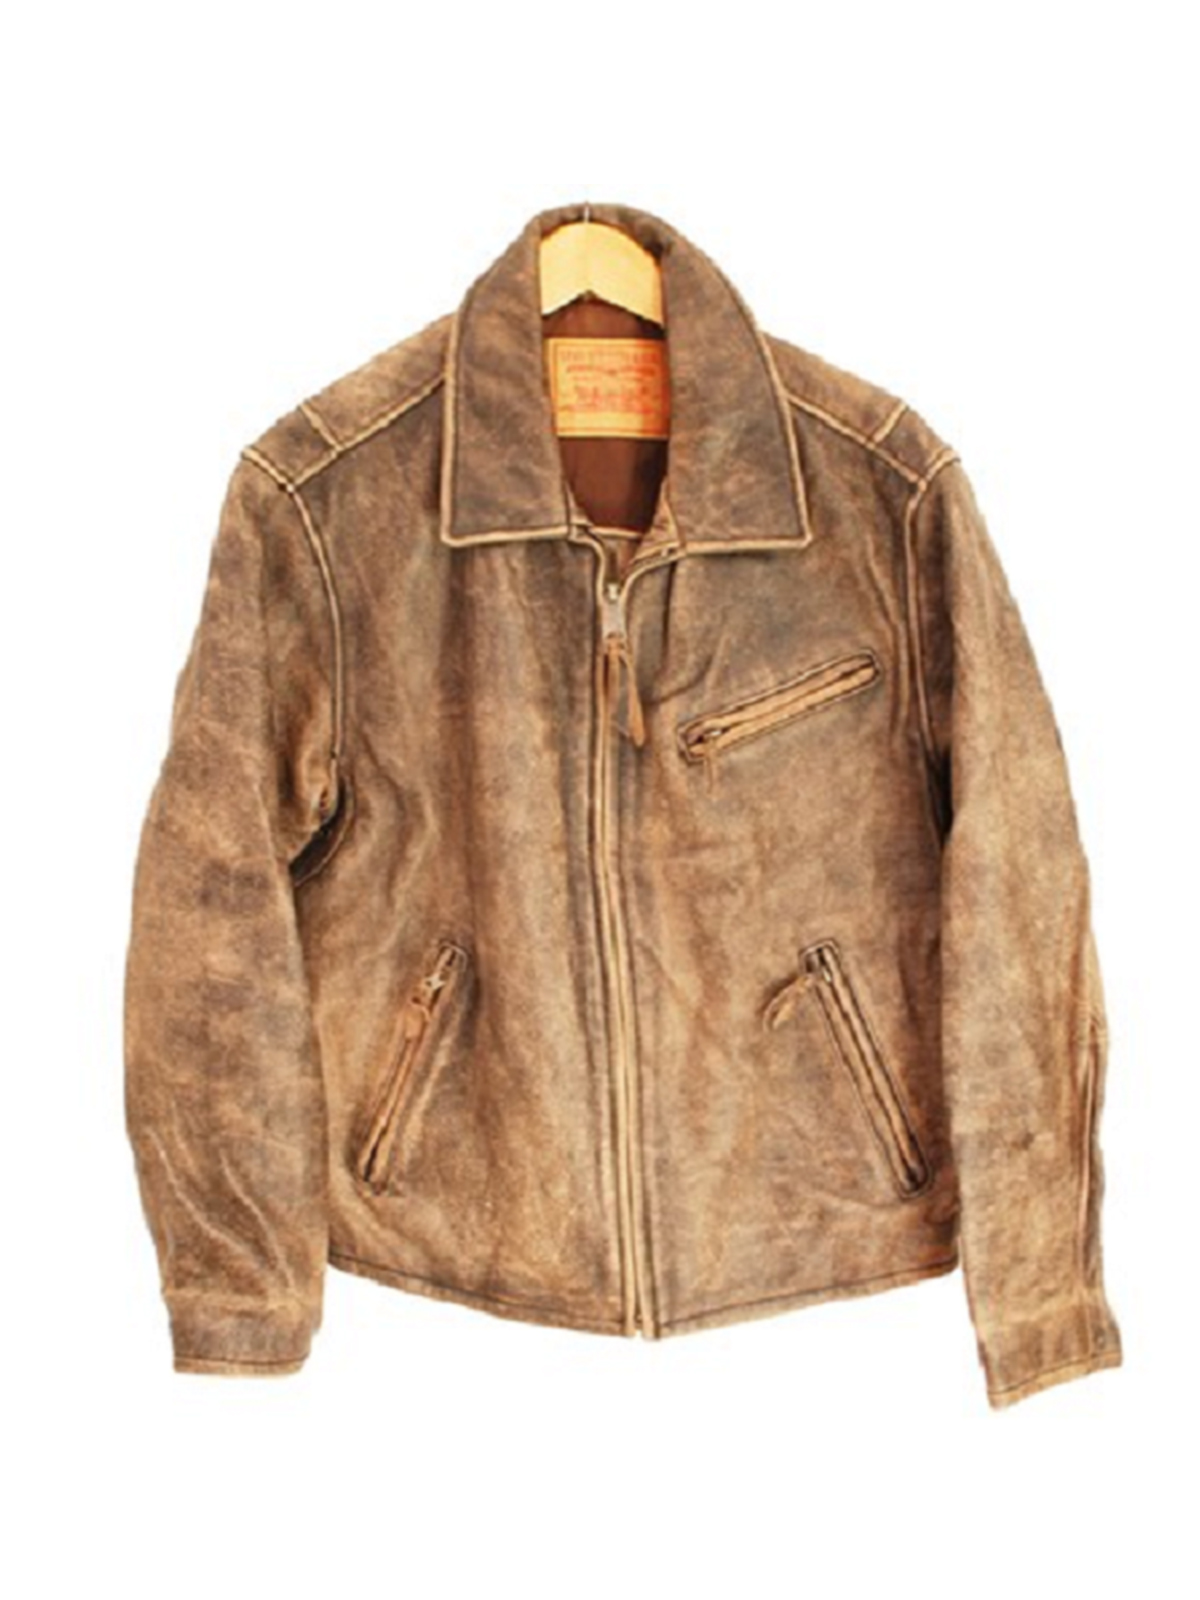 Levi’s Rare Vintage Style Leather Jacket – Bay Perfect